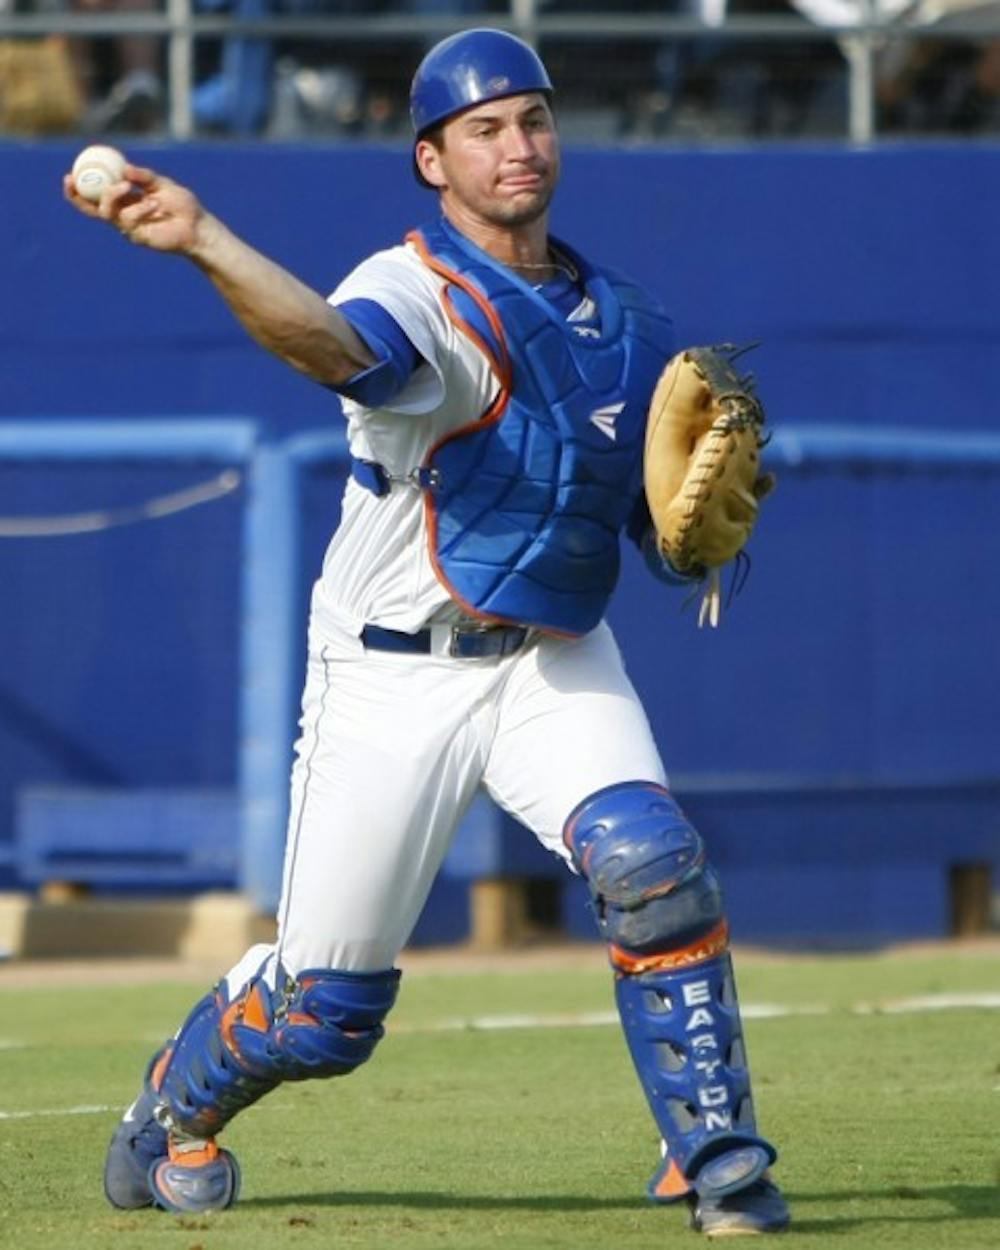 <p>Florida junior catcher Mike Zunino throws to first during a game against LSU on April 7. Zunino was ranked by ESPN’s Keith Law as the nation’s No. 2 overall prospect for this year’s MLB Draft.</p>